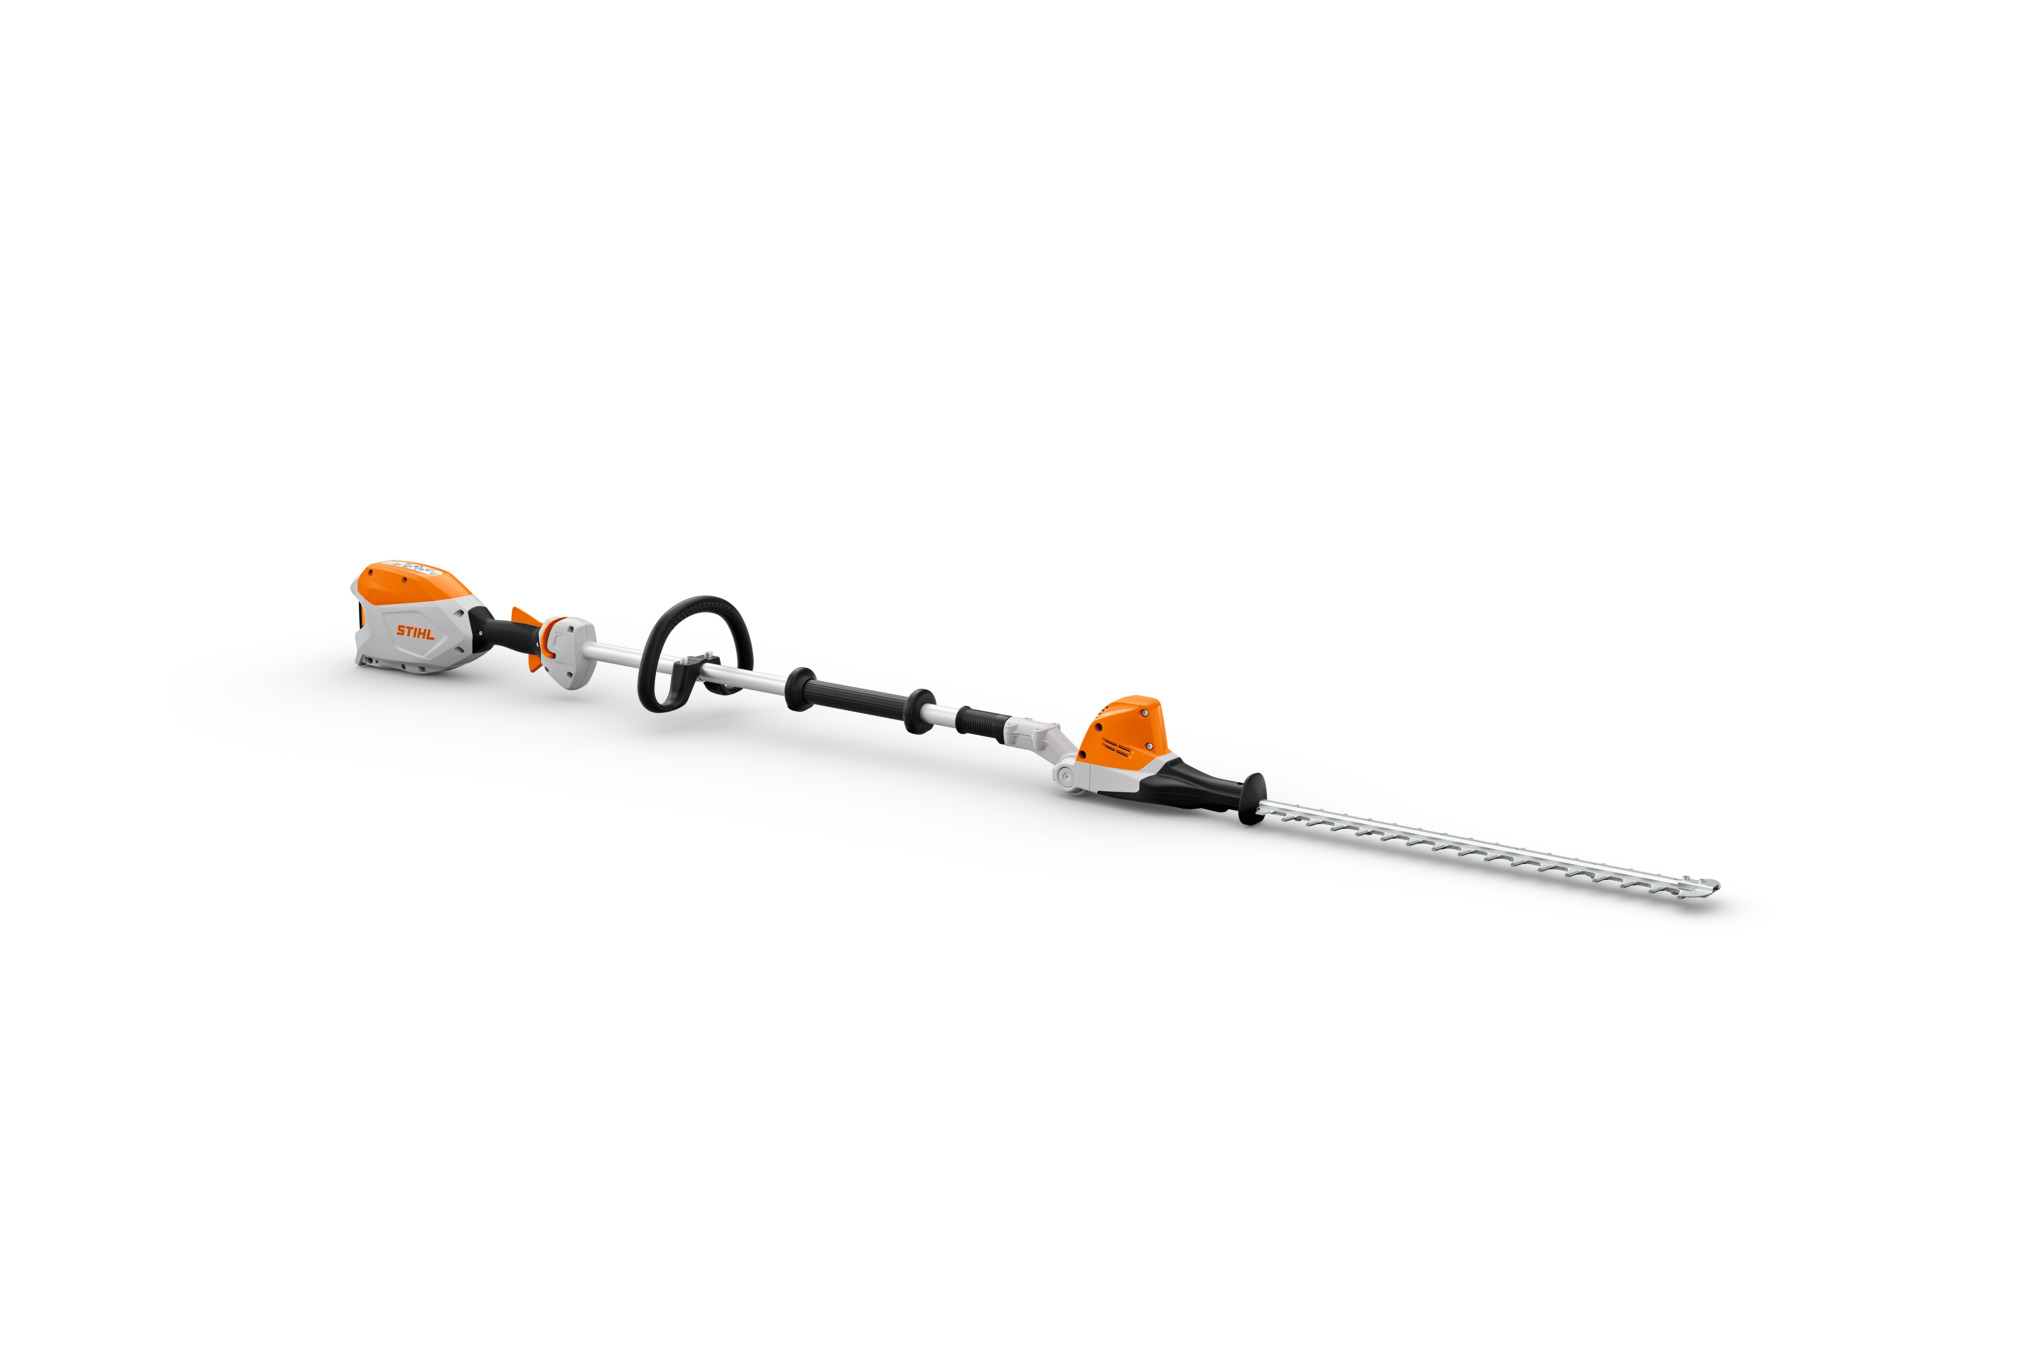 HLA 66 Cordless Long-reach Hedge Trimmer